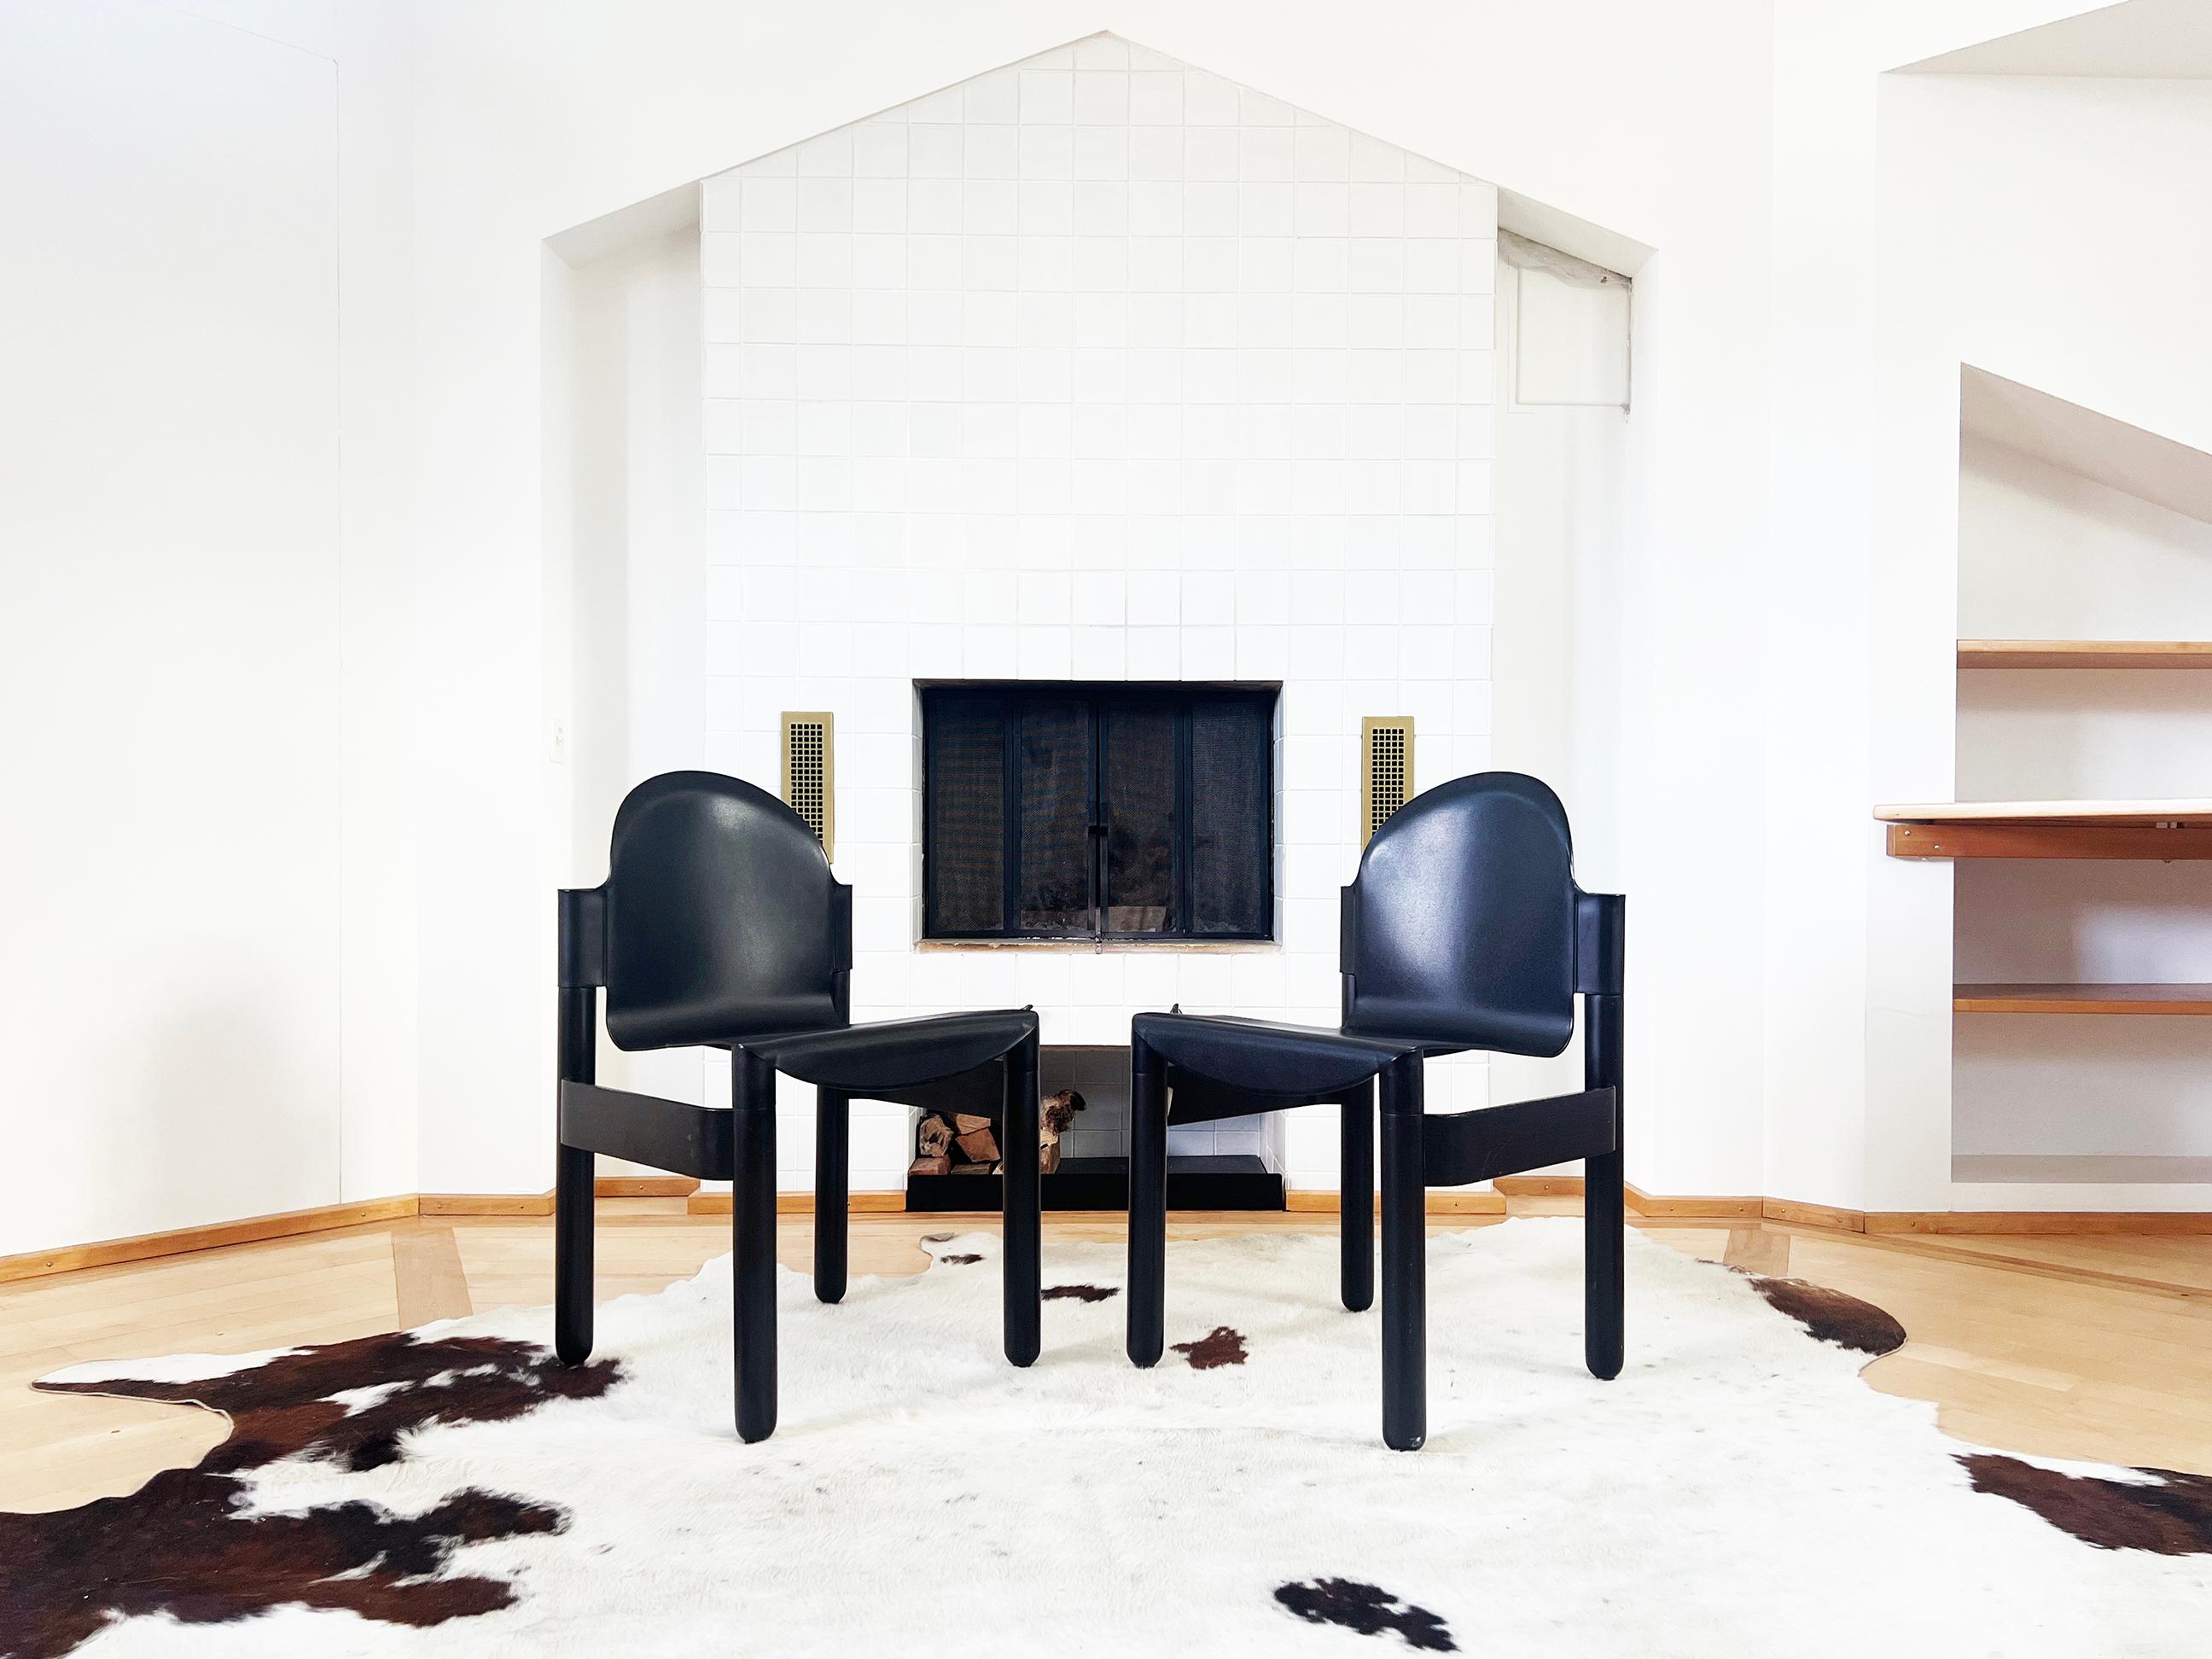 Beech Postmodern 1980s Flex 2000 Stacking Chairs by Gerd Lange for Thonet, Solid Black For Sale